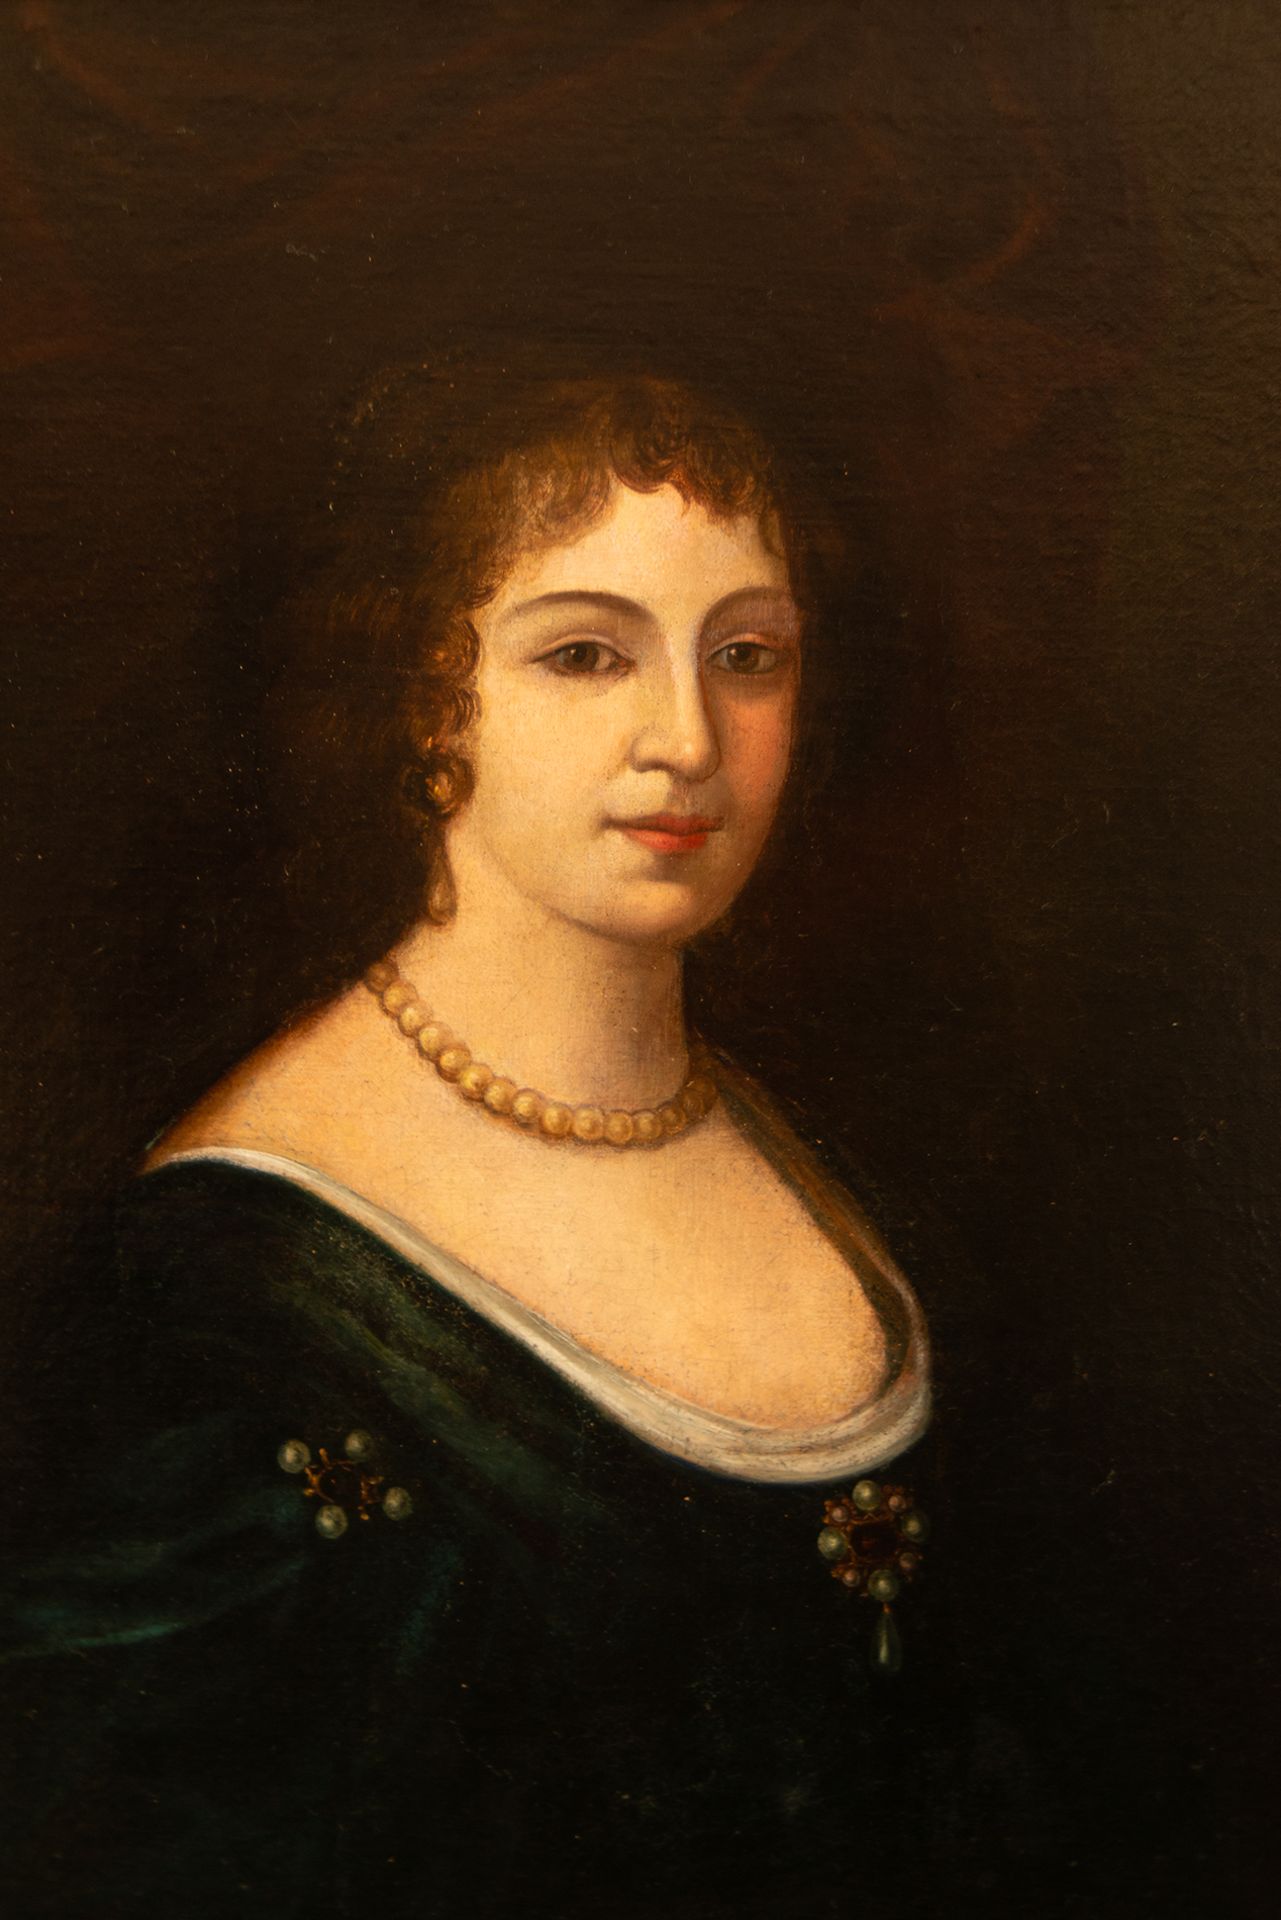 Portrait of a Lady with a Pearl Necklace, Austrian school, 18th century - Image 2 of 5